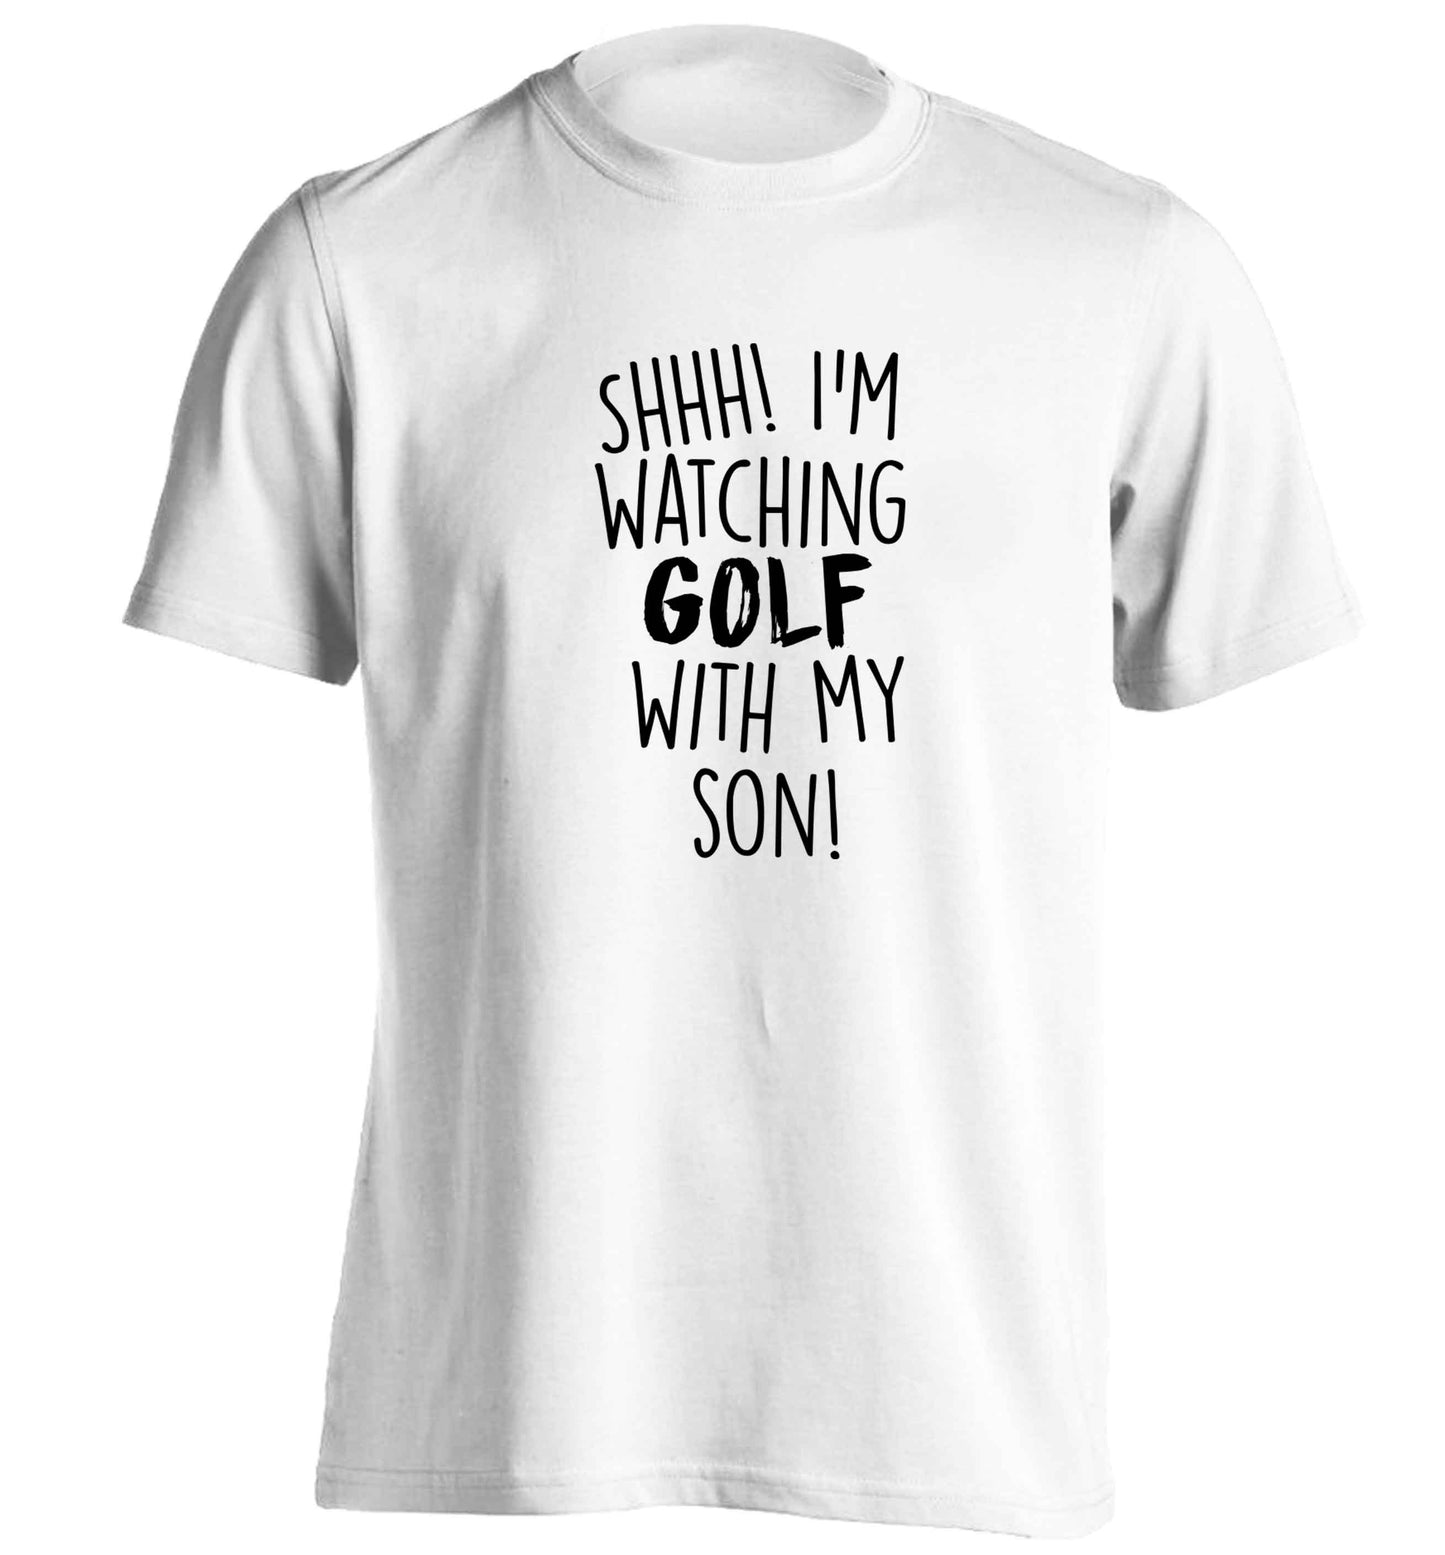 Shh I'm watching golf with my son adults unisex white Tshirt 2XL